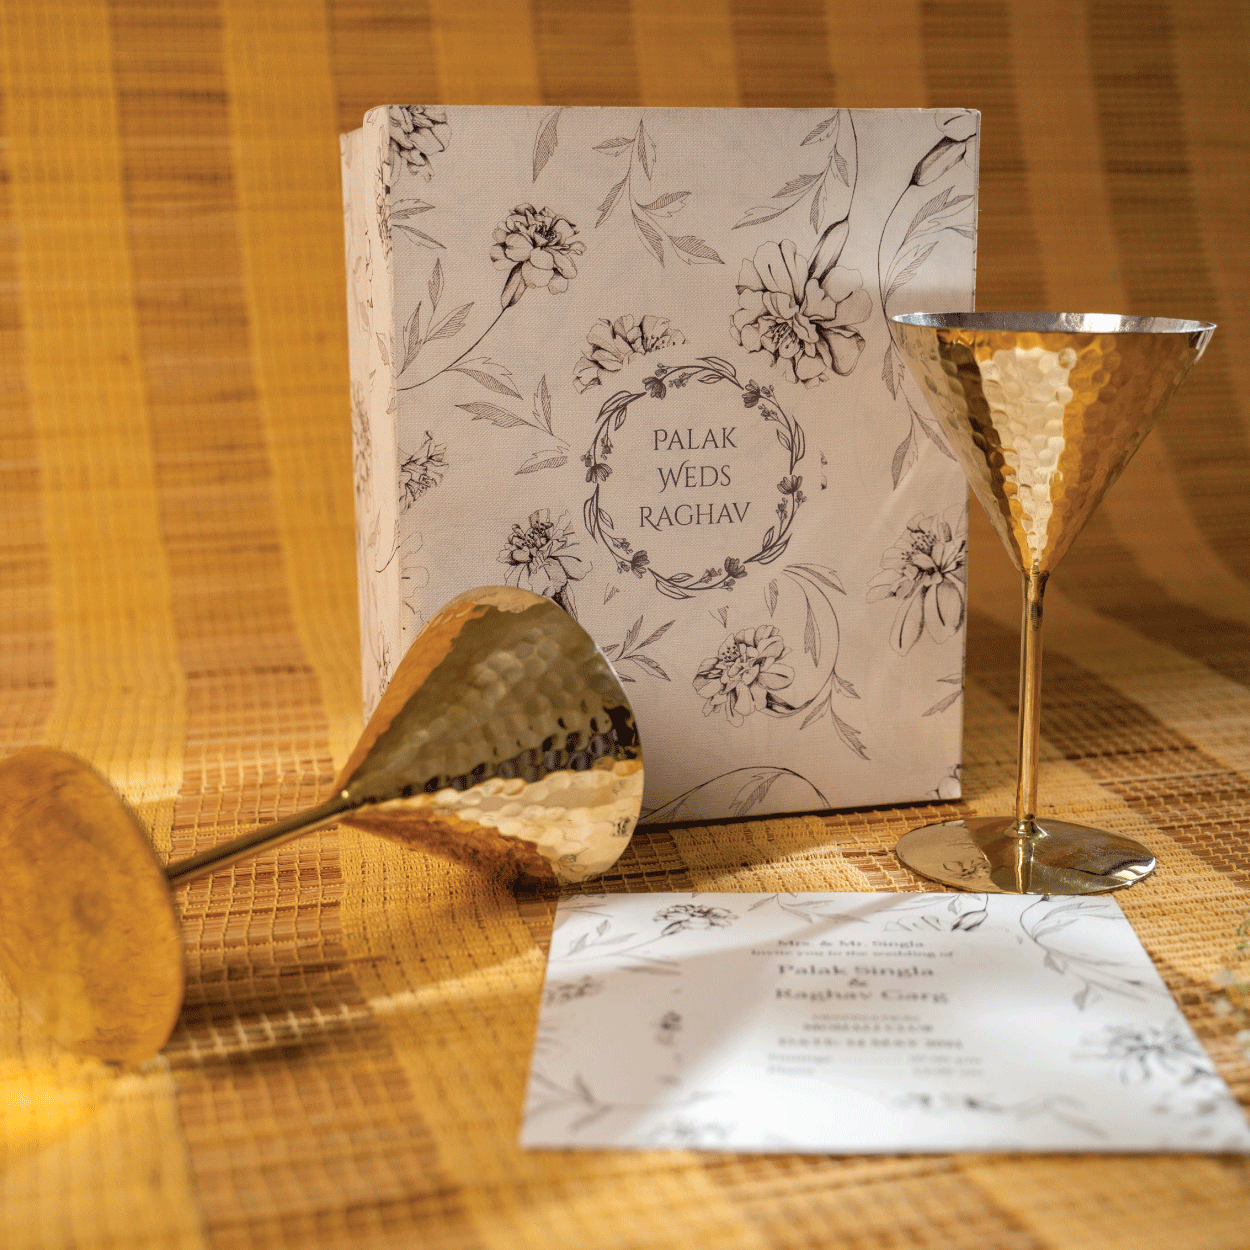 P-Tal - Wedding invites with P-TAL cocktail glasses